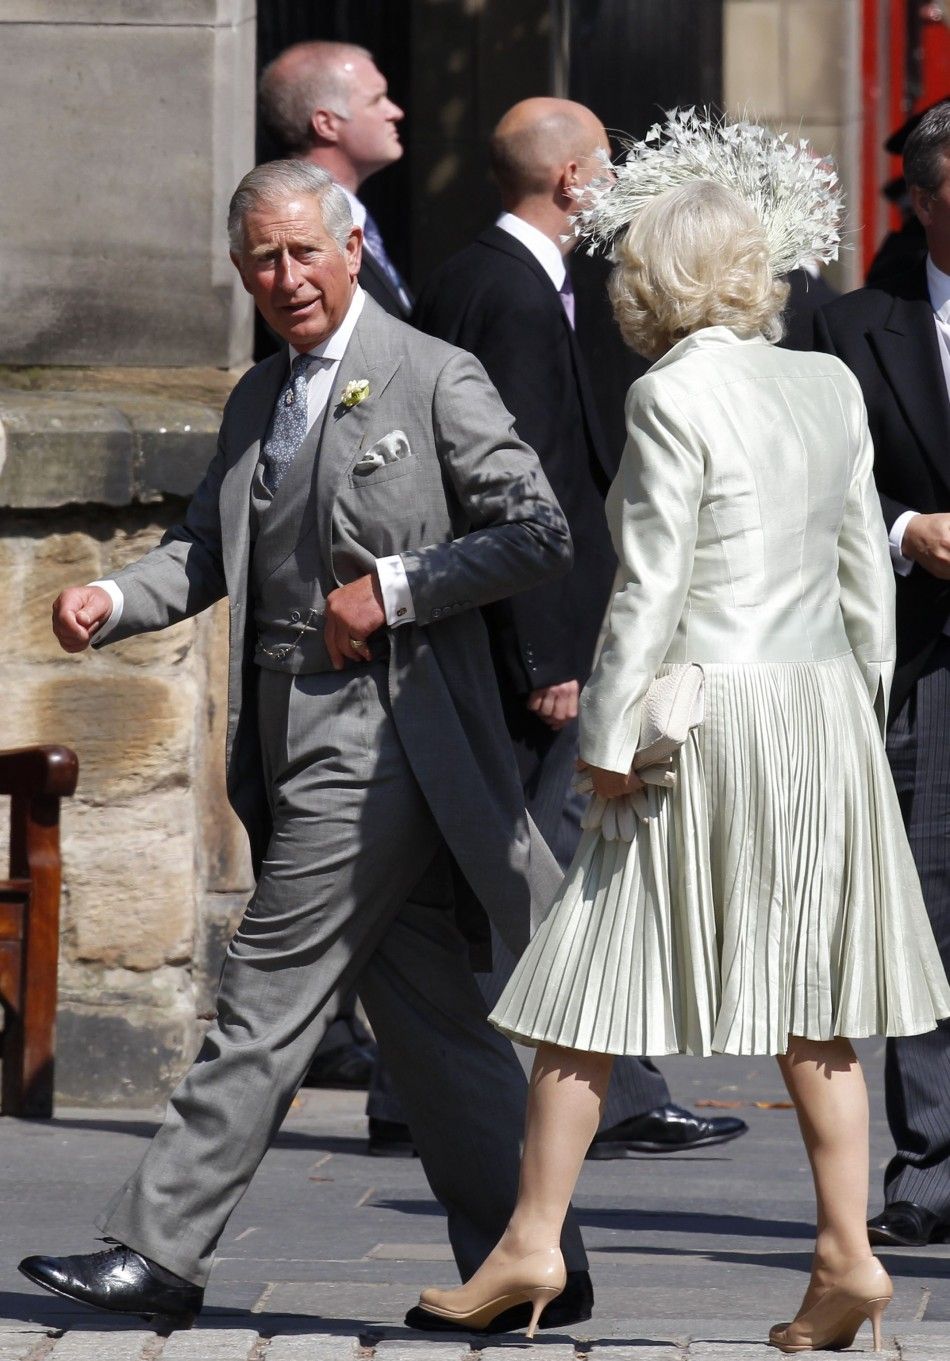 Britains Prince Charles and his wife Camilla, Duchess of Cornwall arrive for the wedding between Zara Phillips and Mike Tindall at Canongate Kirk in Edinburgh